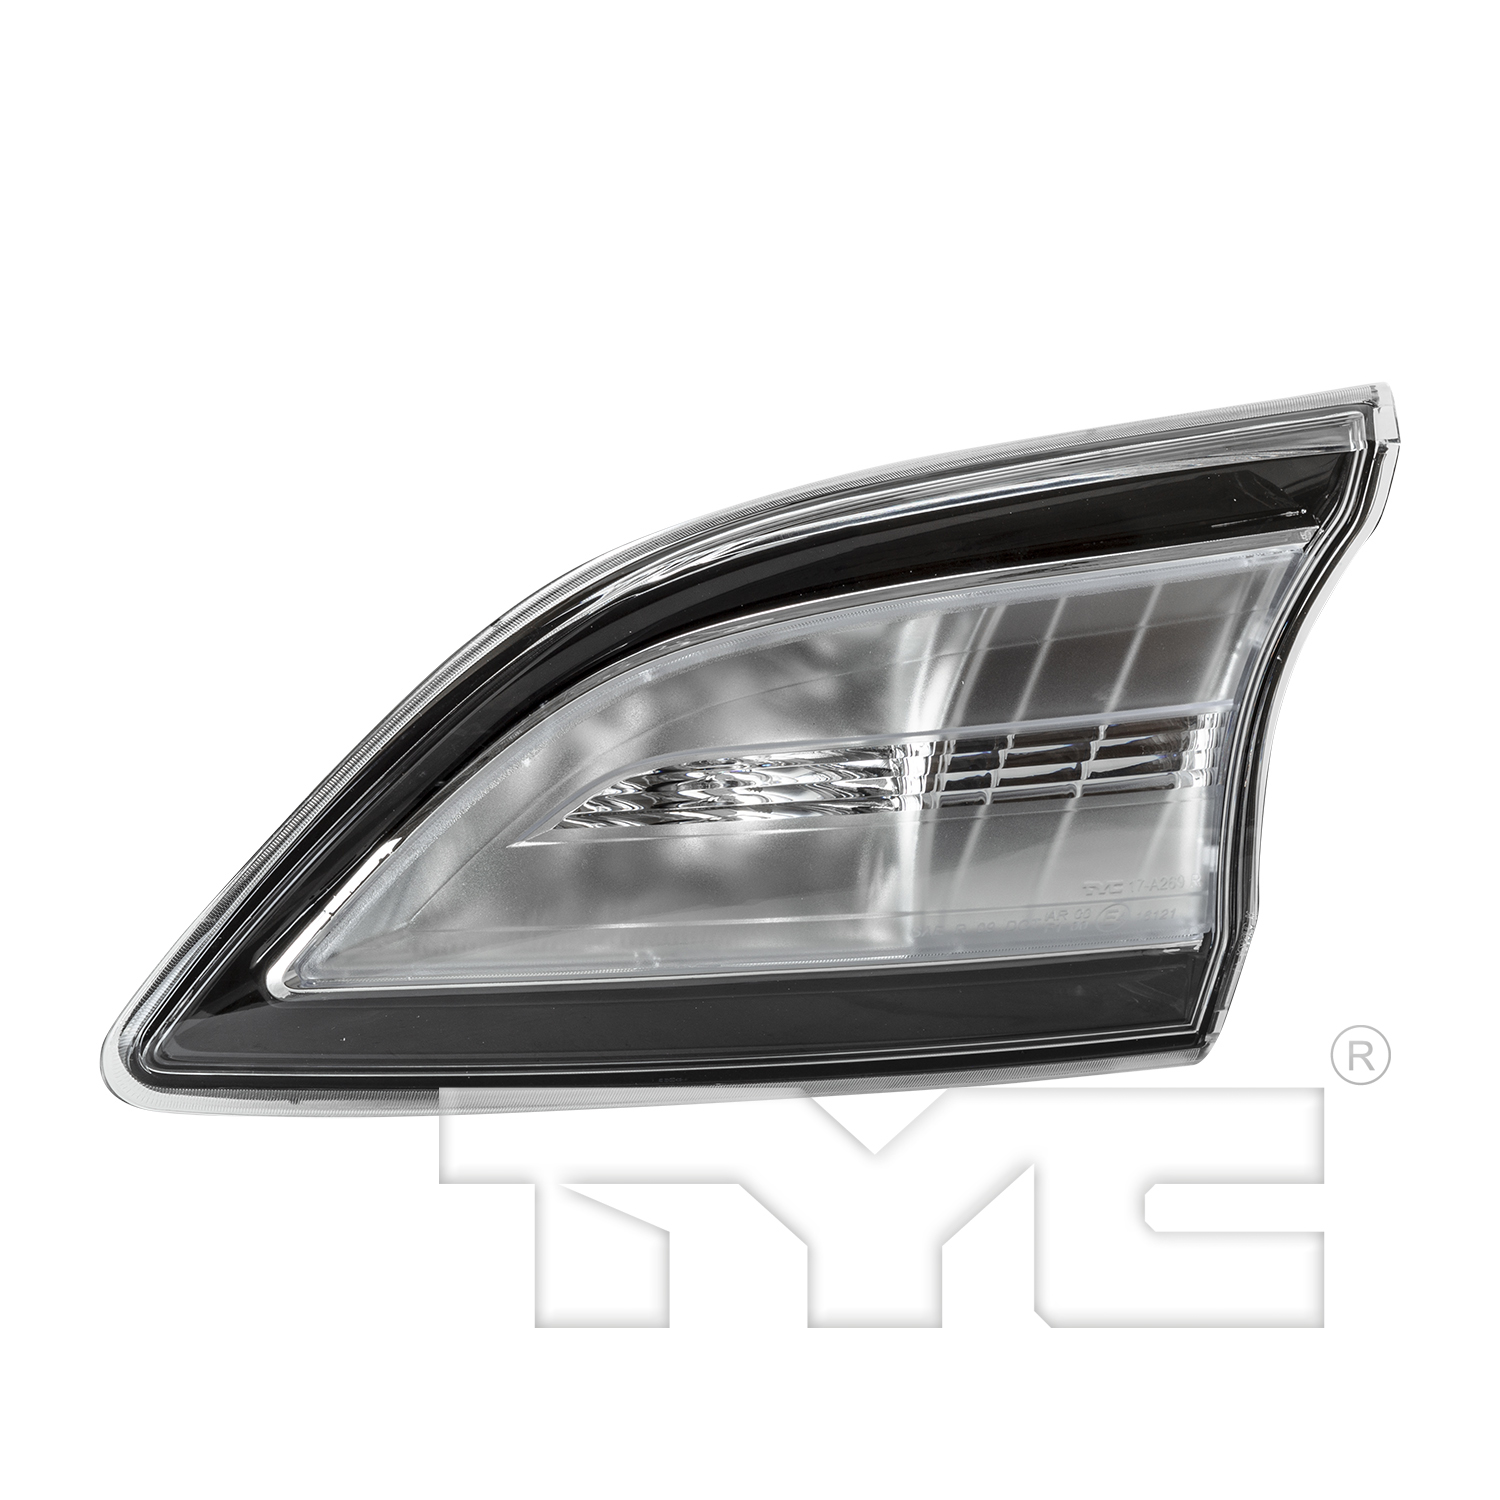 Aftermarket LAMPS for MAZDA - 3, 3,10-13,RT Back up lamp assy